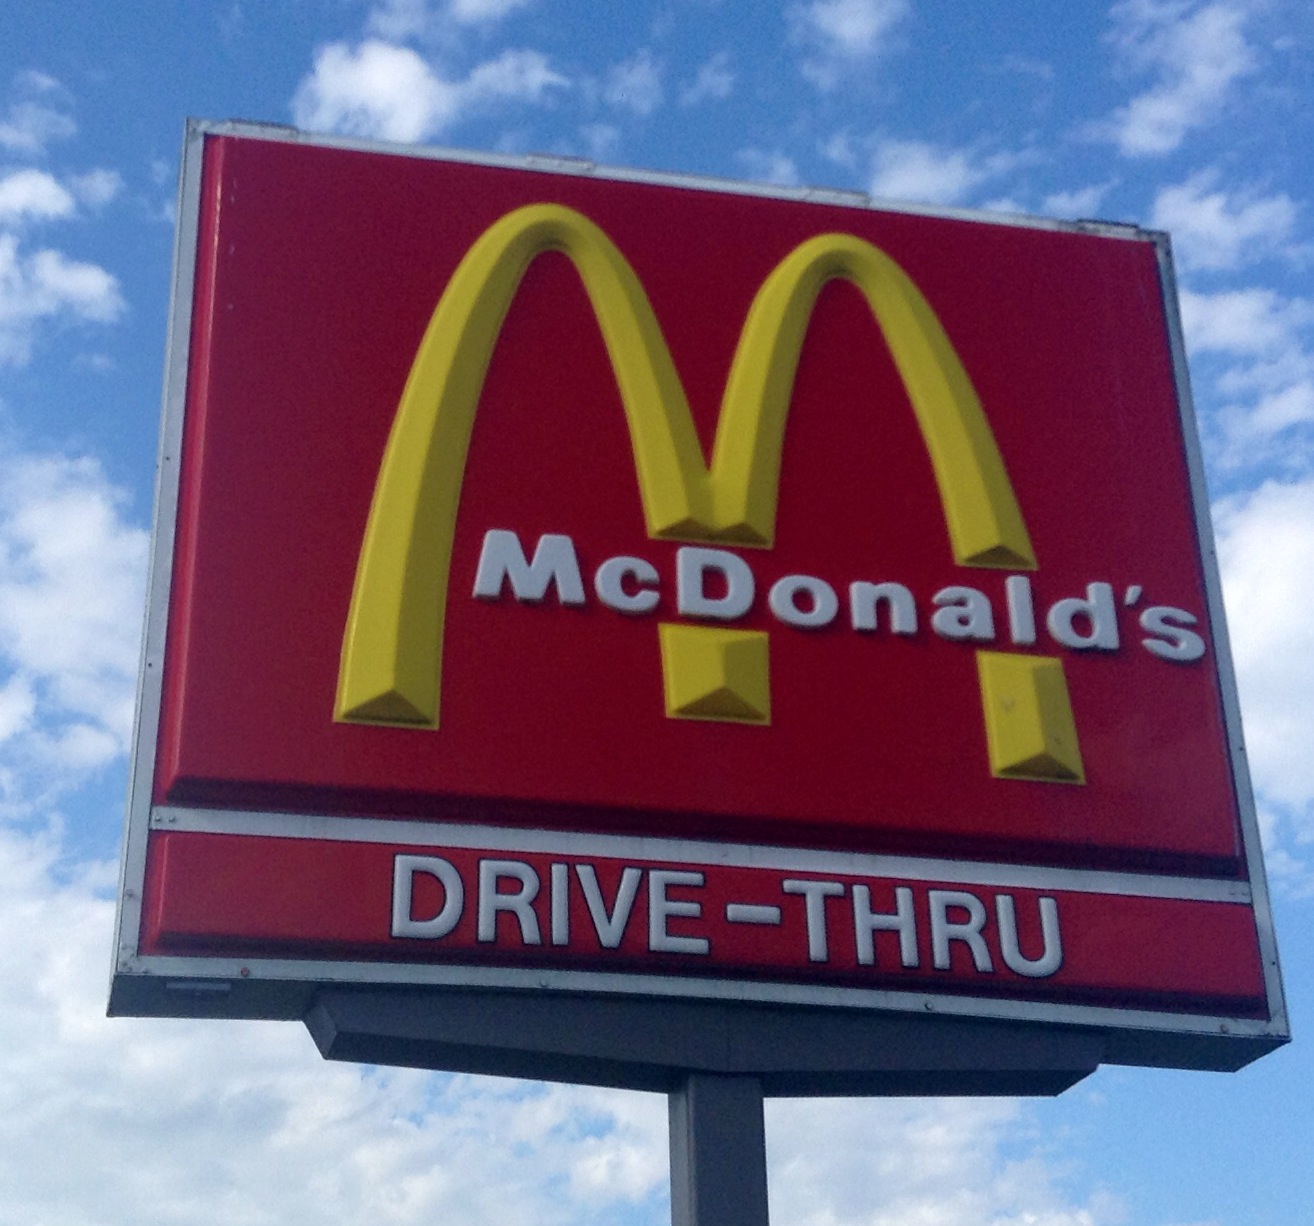 the sign for the mcdonalds drive thru restaurant